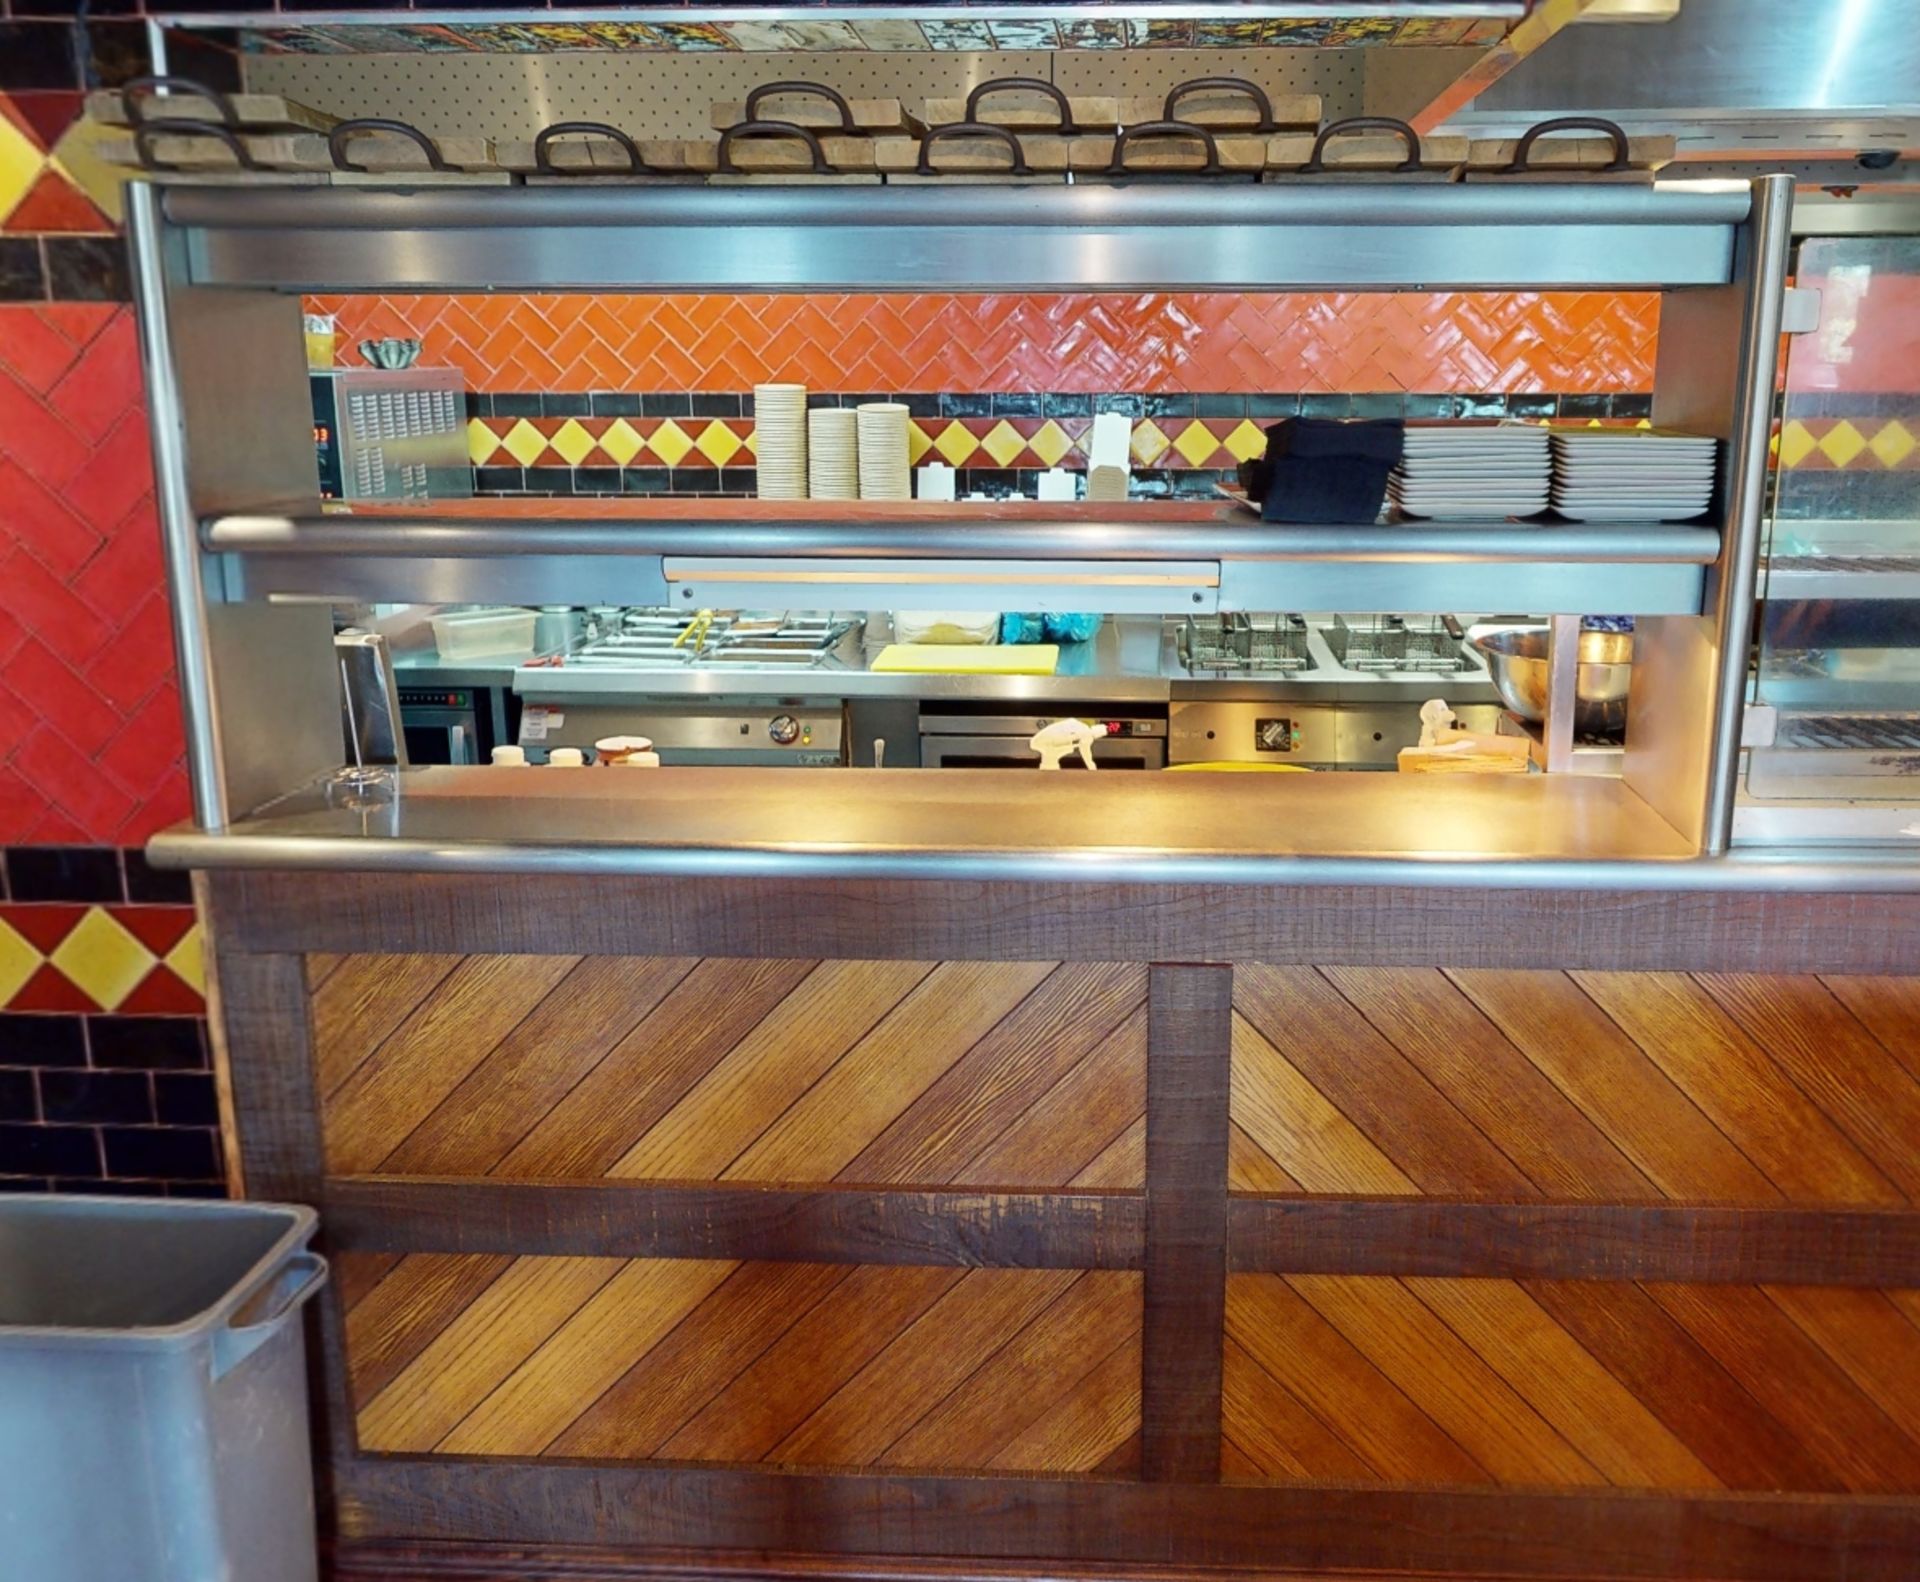 2 x Stainless Steel Passthrough Heated Gantries With Countertop and Glass Divider - Image 4 of 8